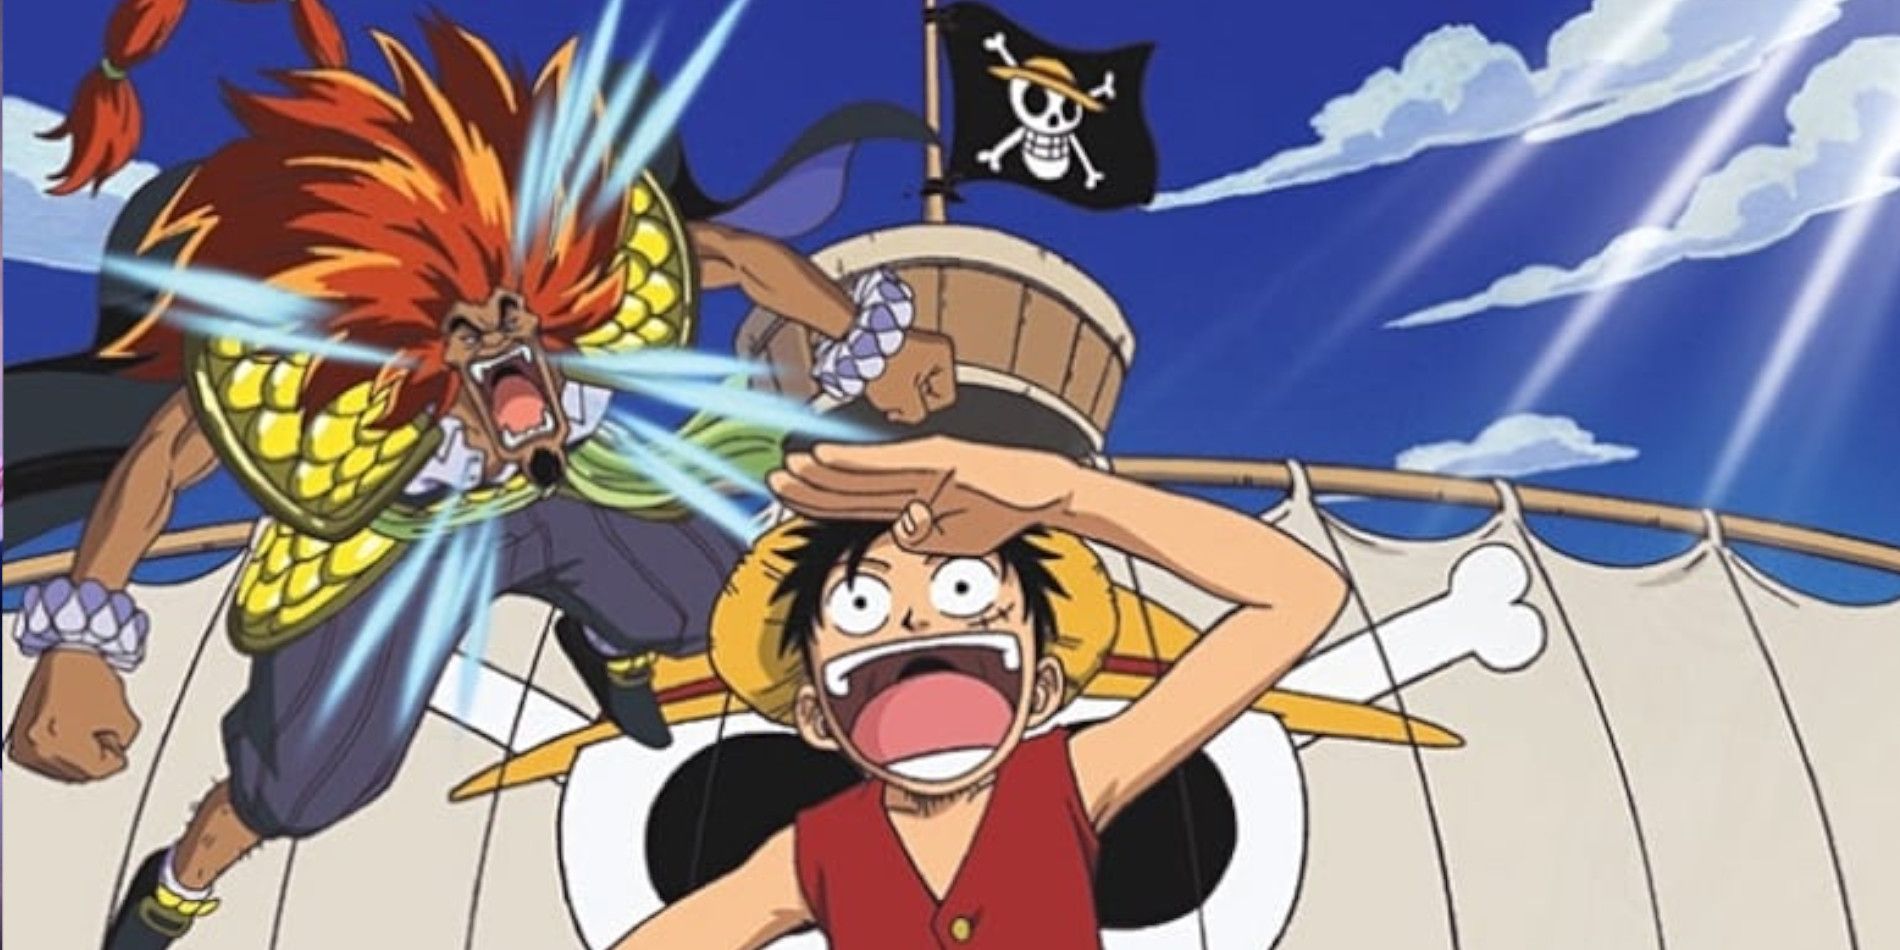 An image from One Piece The Movie.